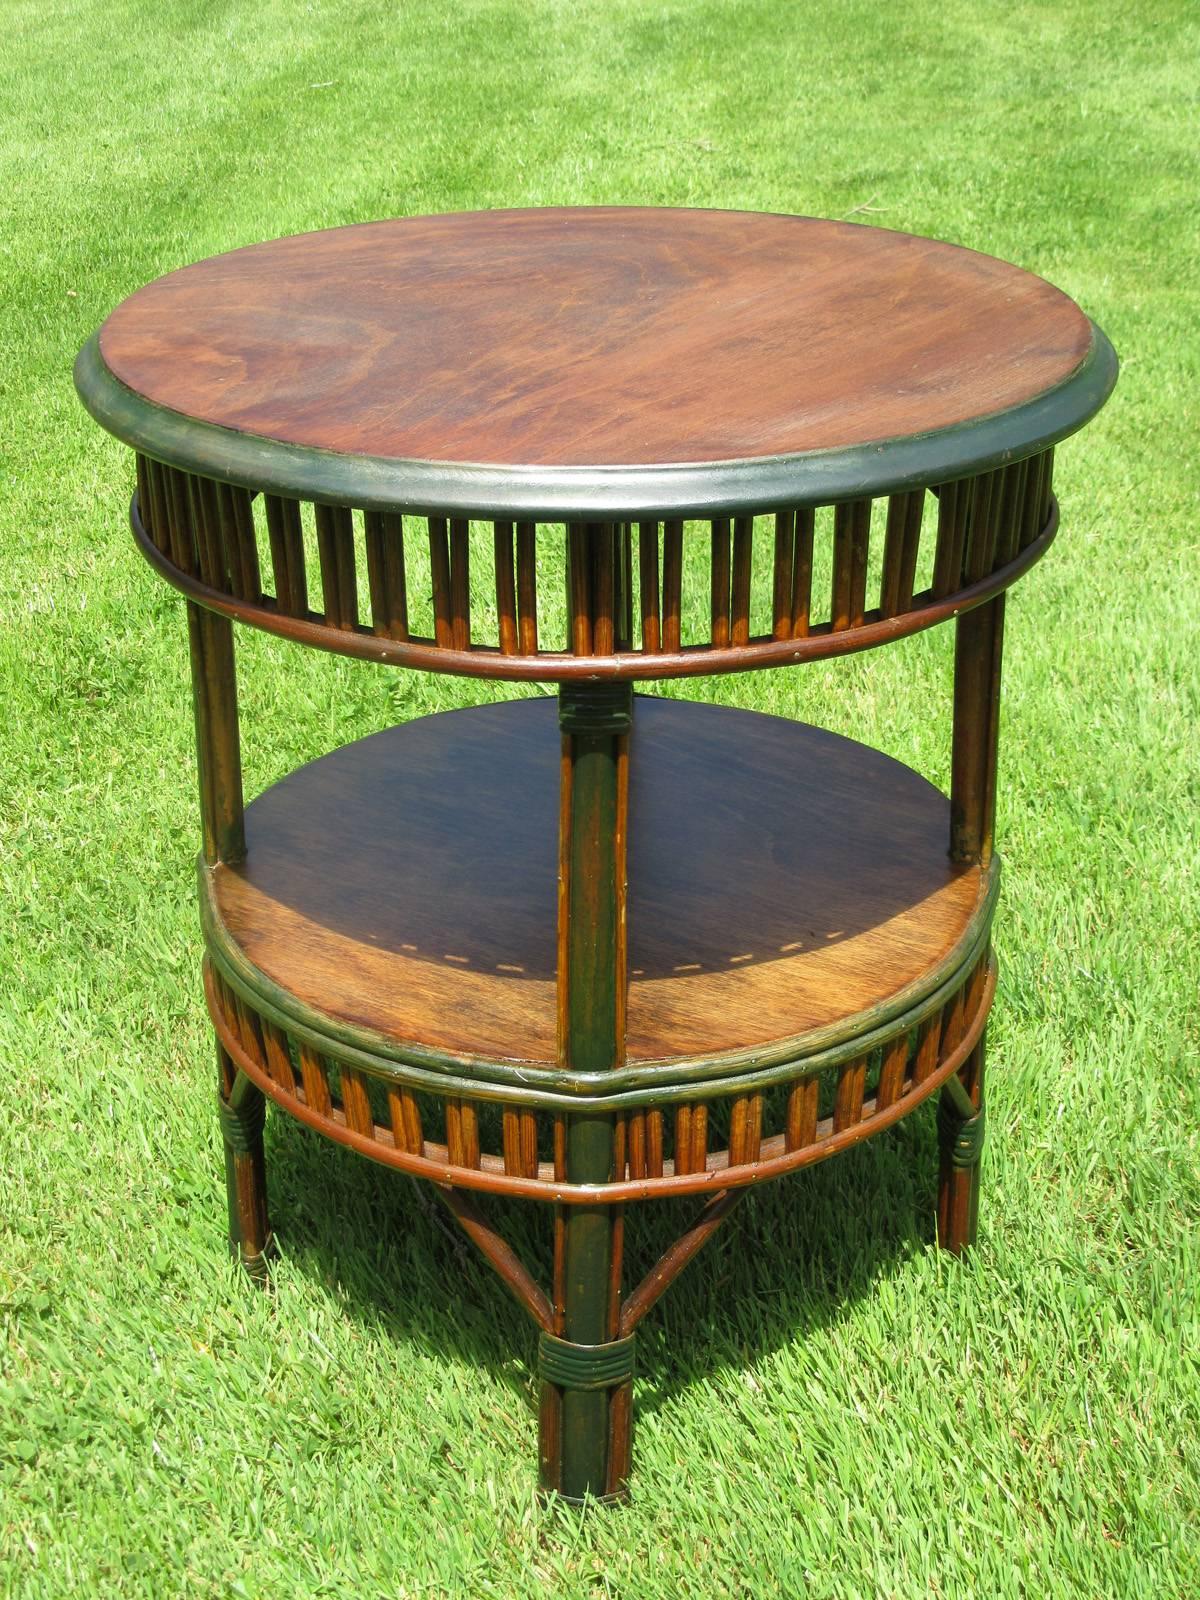 Round stick wicker end table in natural stained finish and faded green painted trim. Wood top and bottom shelf, both having paired reed aprons. Handy portable tea table height. Last photo shown with matching armchairs, listed and priced separately.